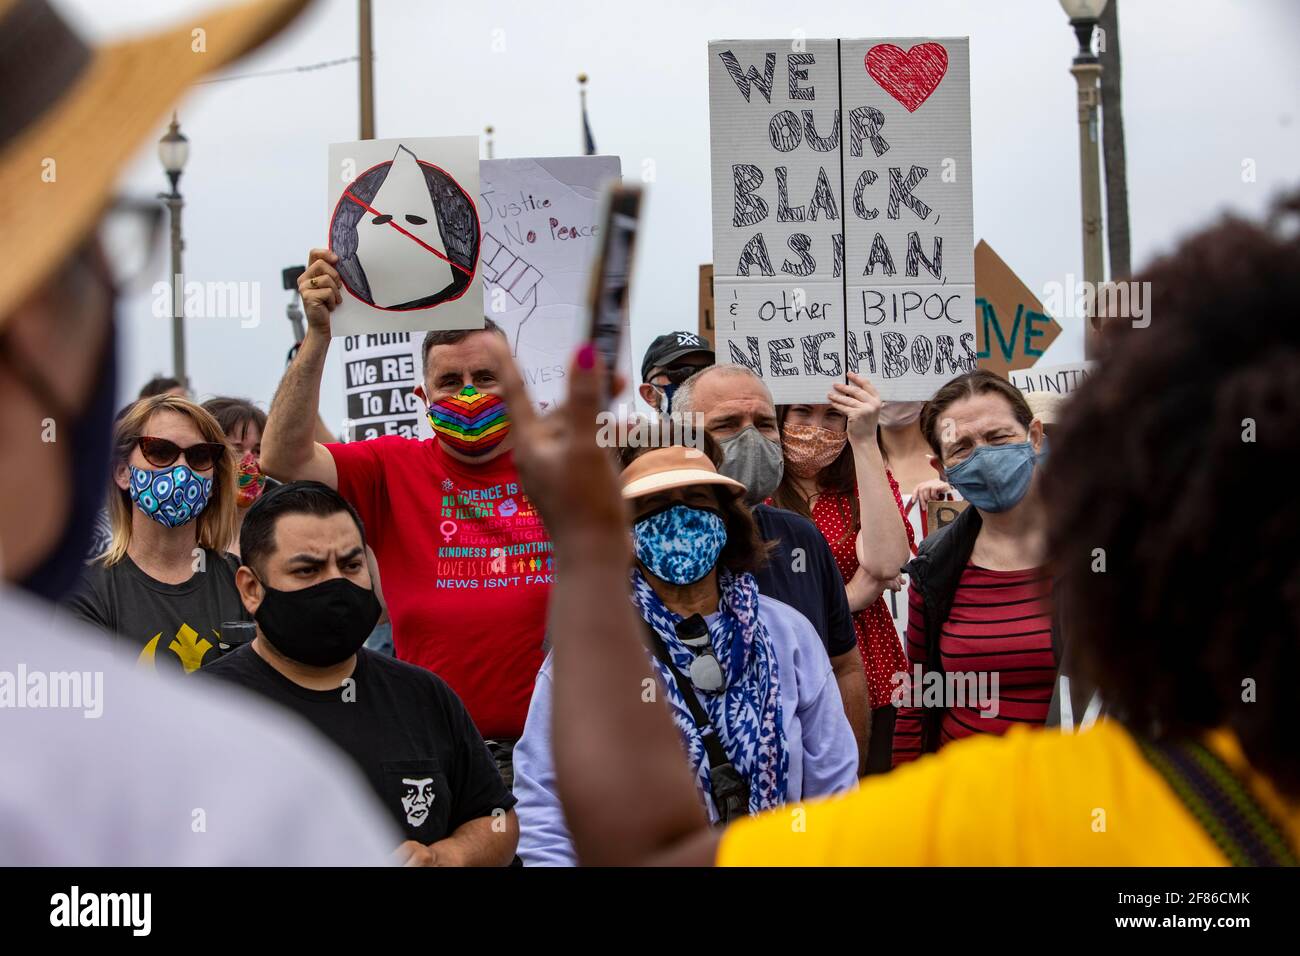 Los Angeles, California, USA. 11th Apr, 2021. A couple hundred people showed up to counter protest a planned White Lives Matter rally at the Huntington Beach Pier. Credit: Jill Connelly/ZUMA Wire/Alamy Live News Stock Photo